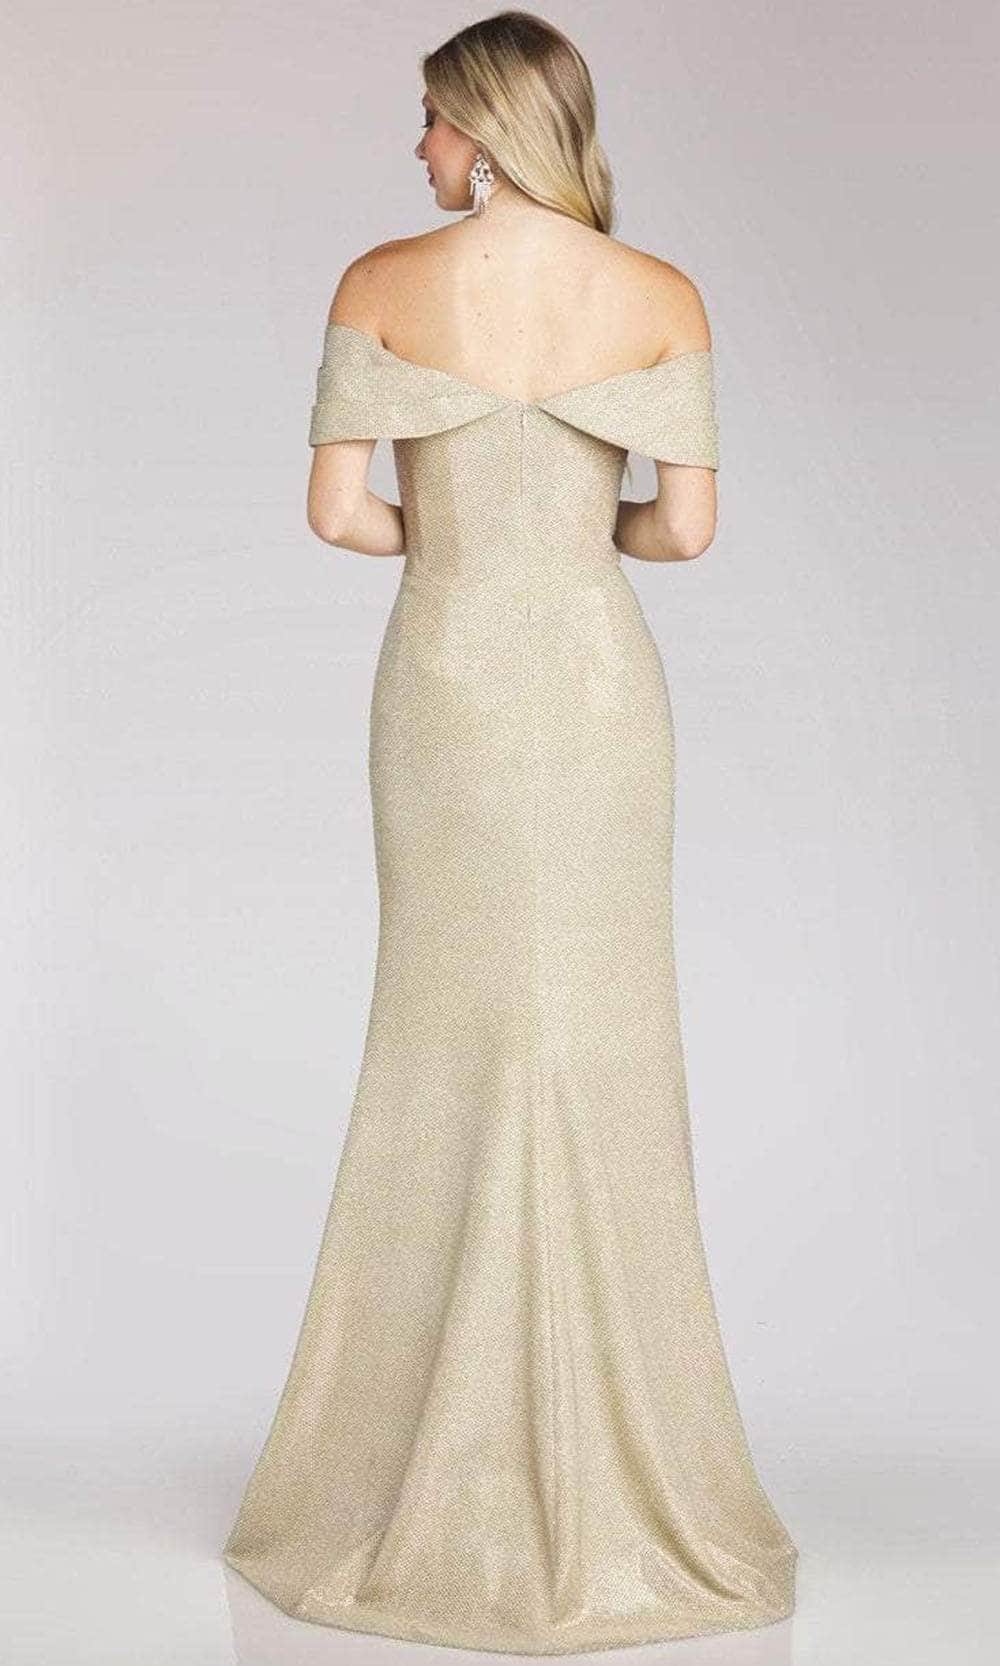 Gia Franco 12155 - Cross Midriff Evening Dress Special Occasion Dress